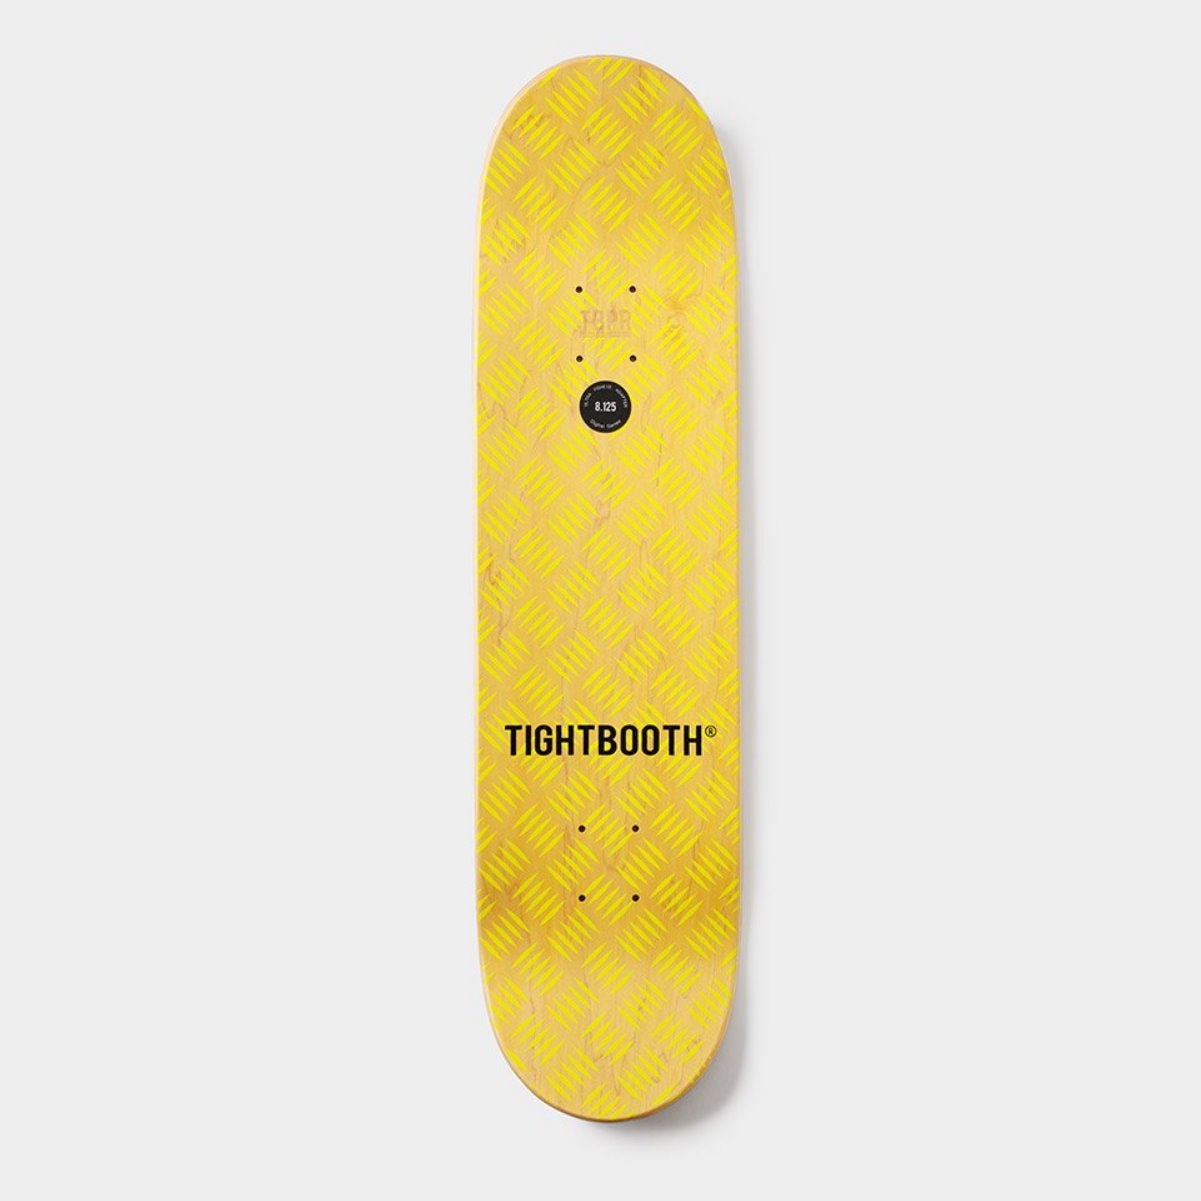 TIGHTBOOTH LOGO BLACK / SAFETY YELLOW DECK